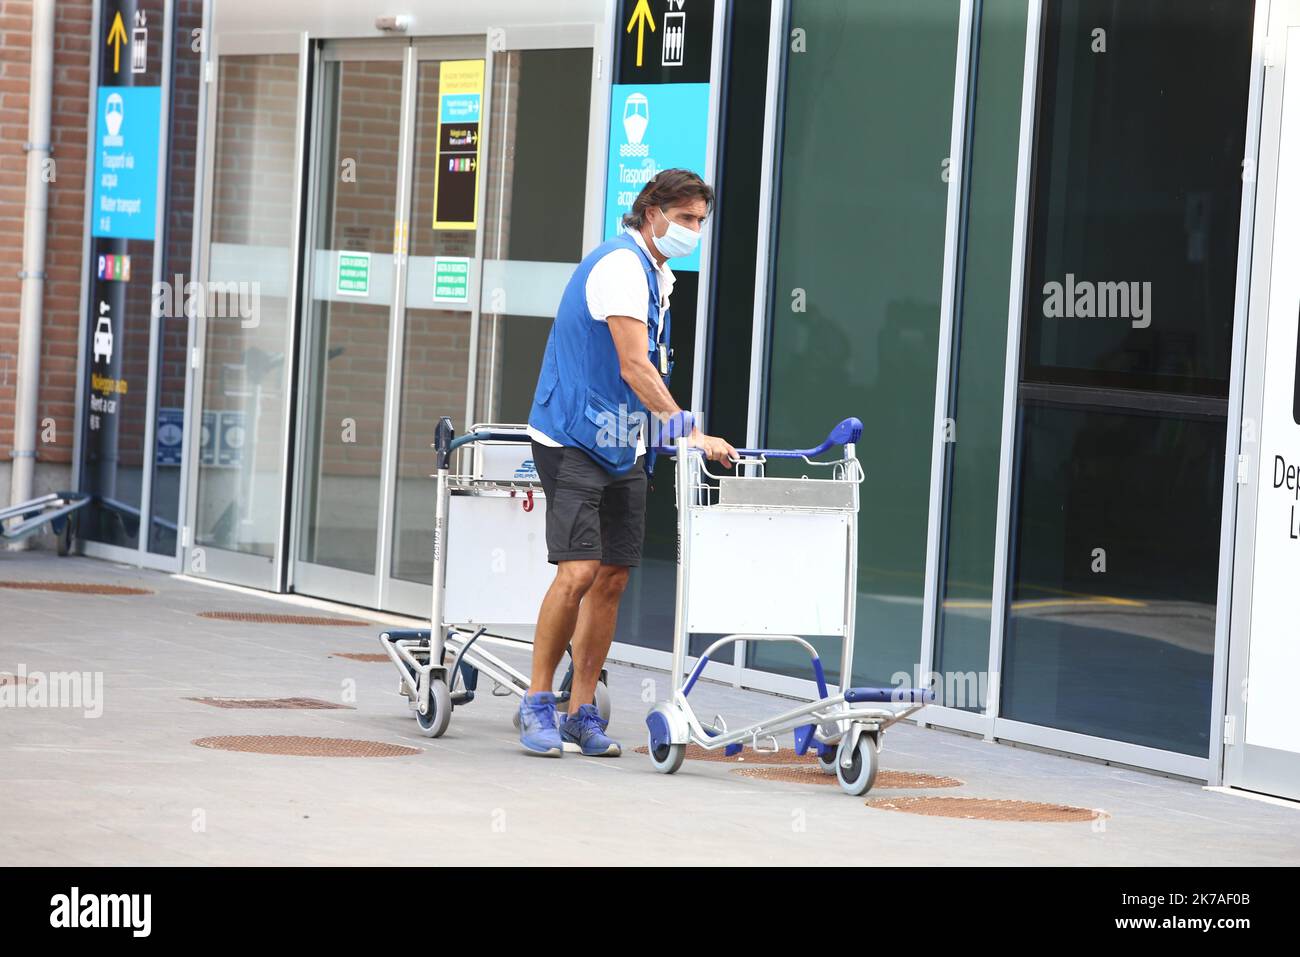 ©Pierre Teyssot/MAXPPP ; Coronavirus Outbreak - Marco Polo Airport on 12th of August 2020, Venice, Italy. A reduction in air traffic and the number of tourists coming by air and transiting through the airport to visit the Serenissima is being observed due to the Covid-19 pandemic. The tourism economy is in deep crisis. Luggage's carrier. Â© Pierre Teyssot / Maxppp  Stock Photo